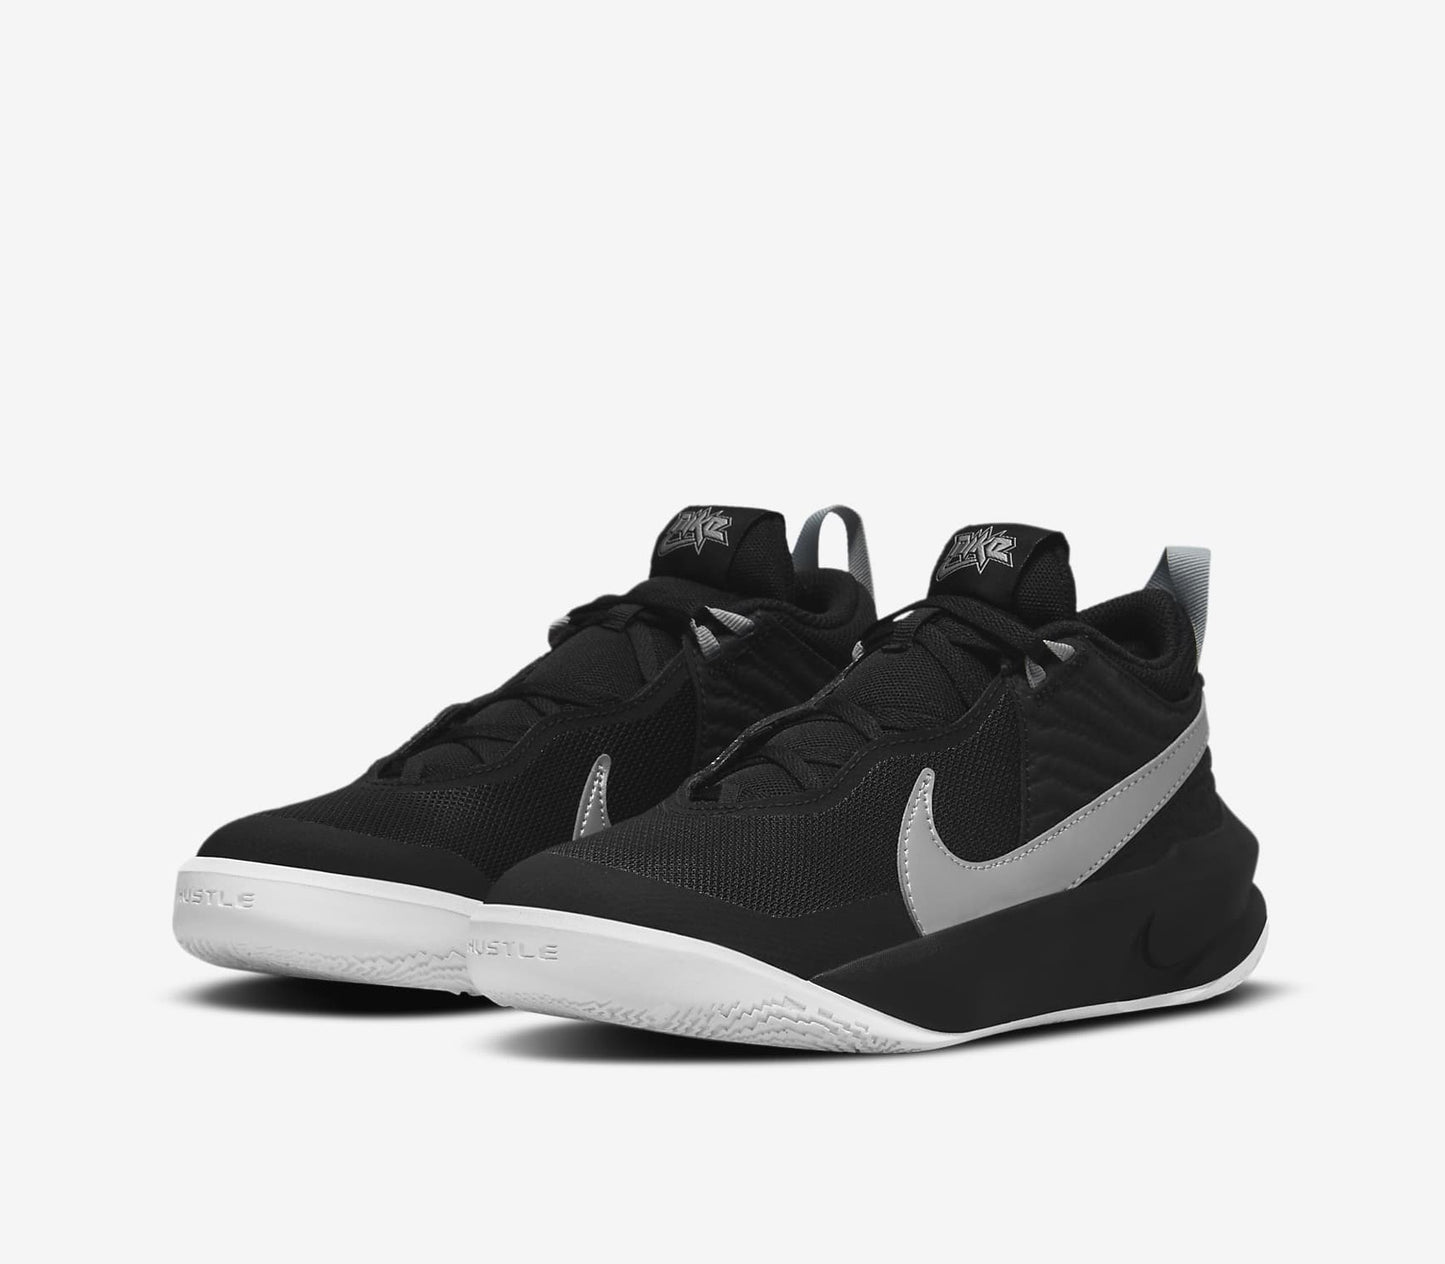 + Nike Youth Team Hustle D 10 - (CW6735 004) - TO - R1L2